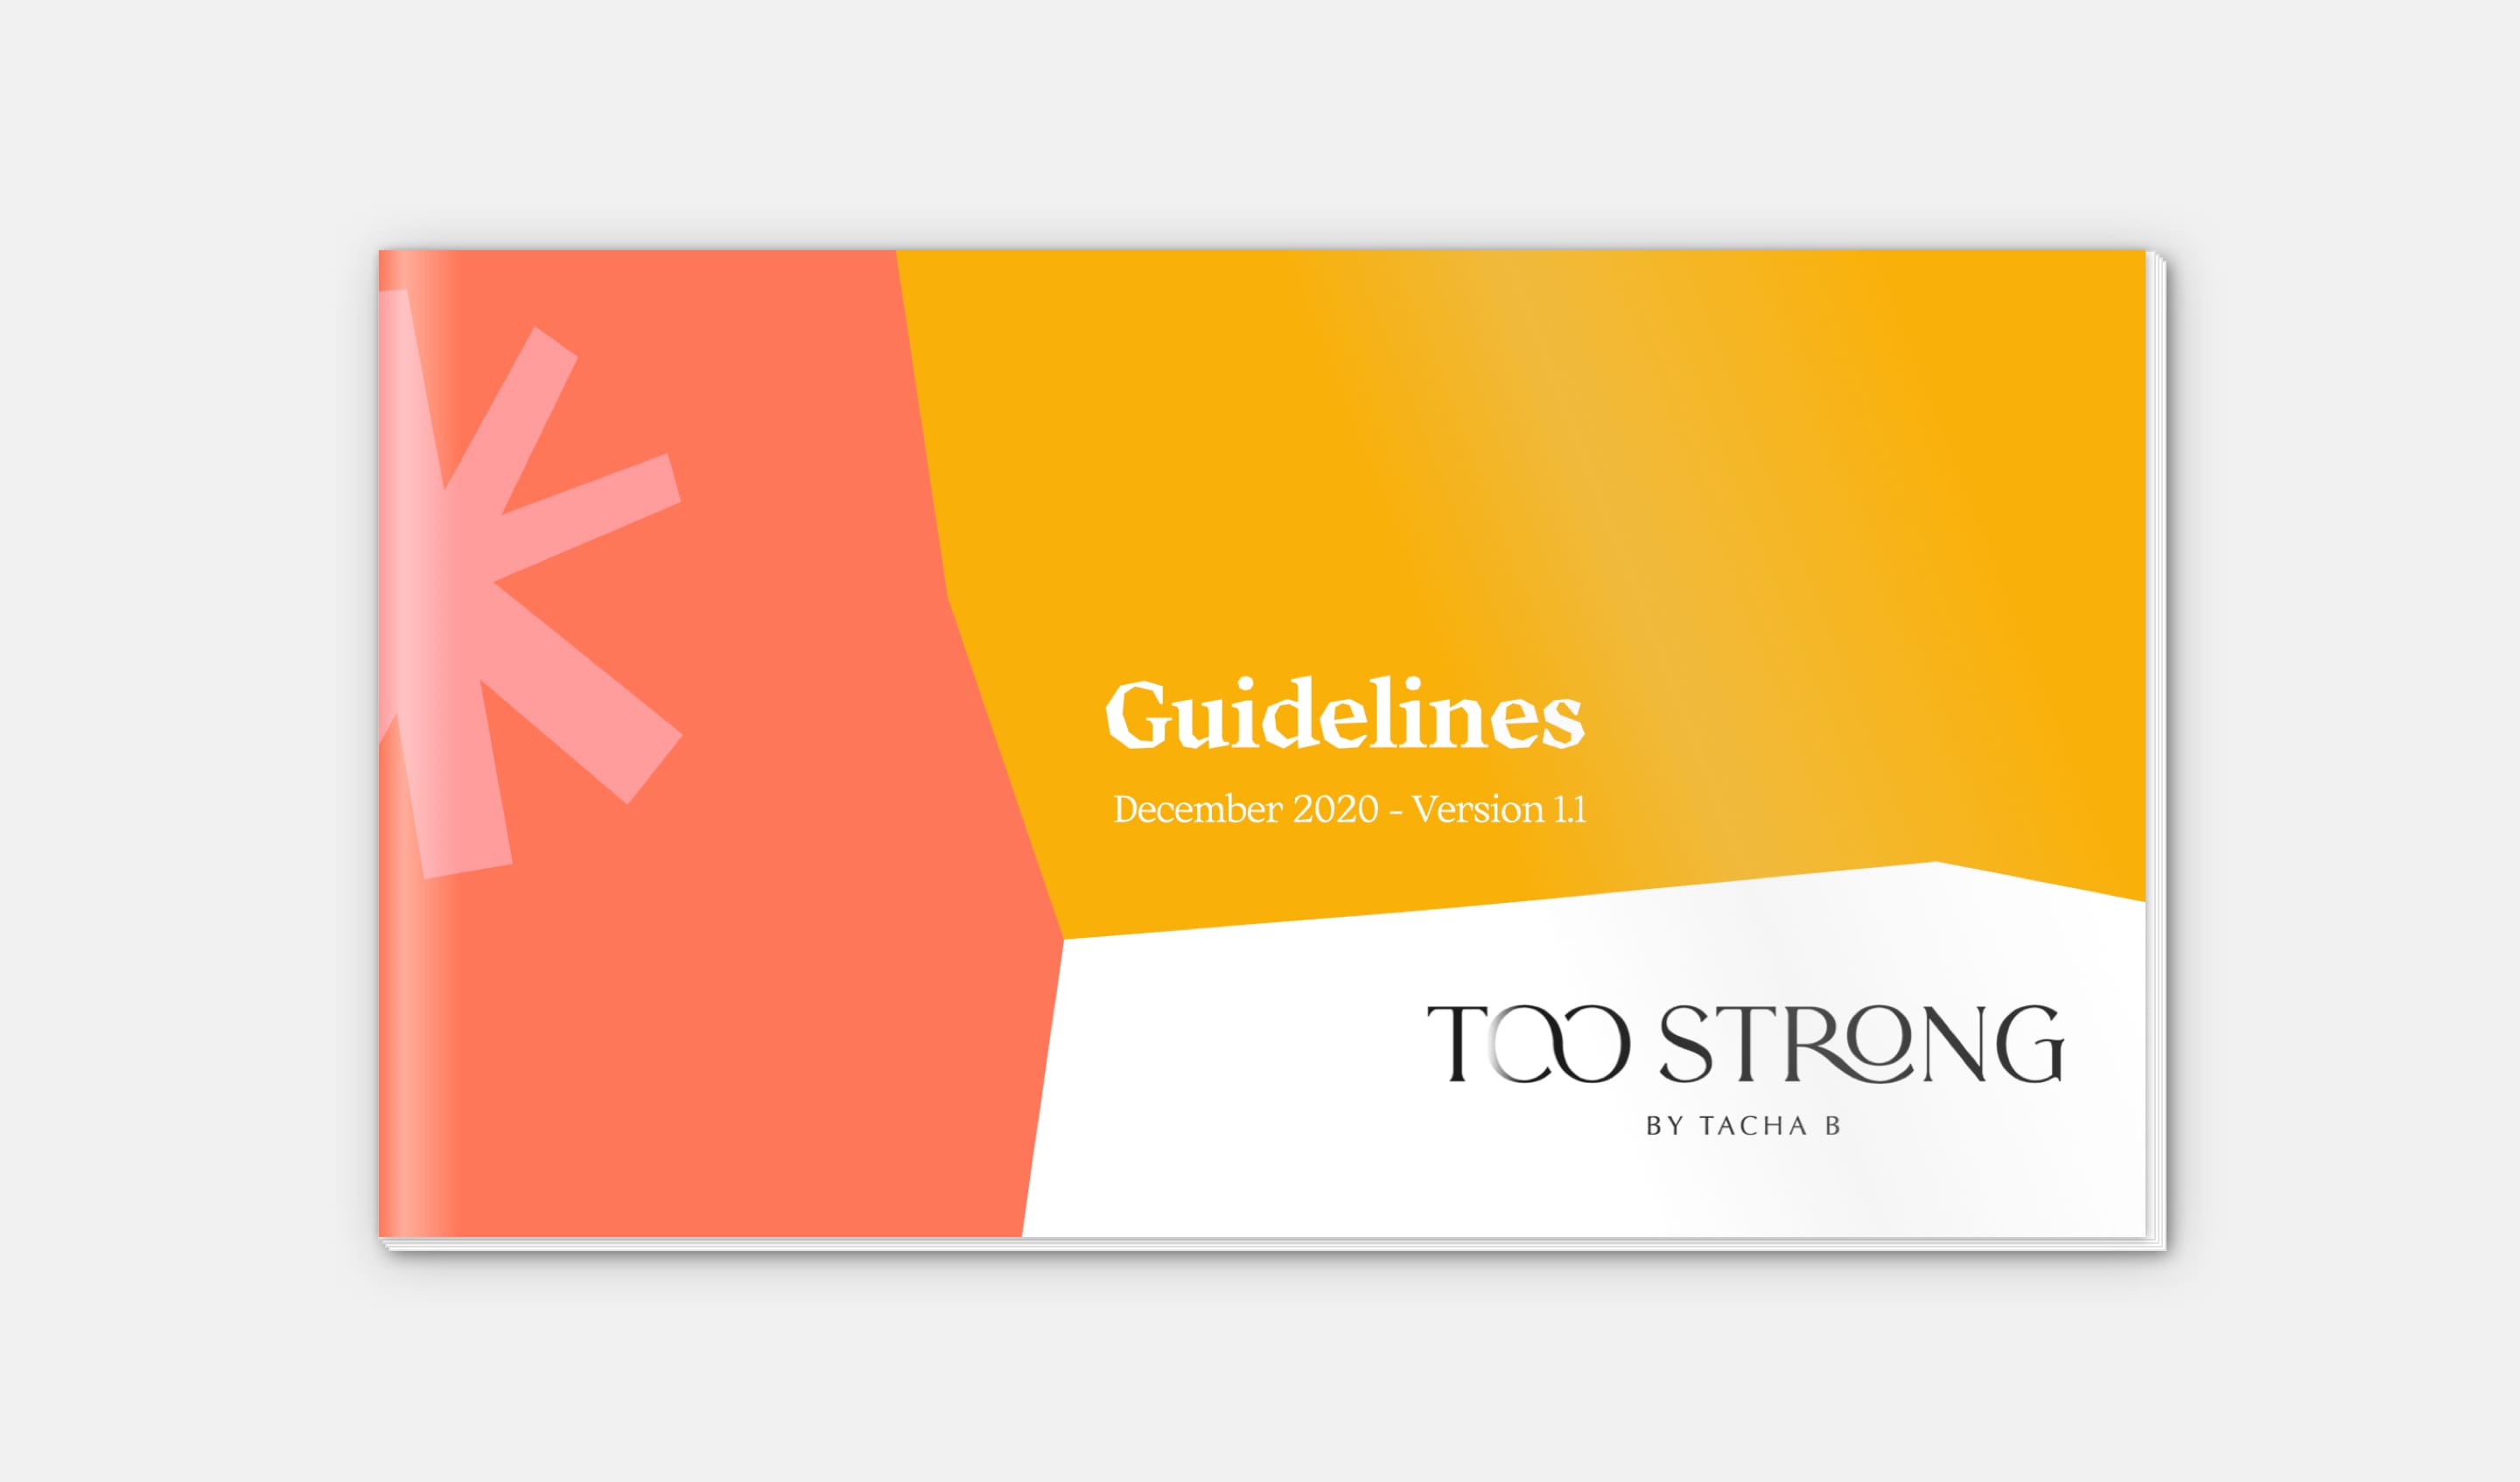 toostrong-guidelines-1@2x